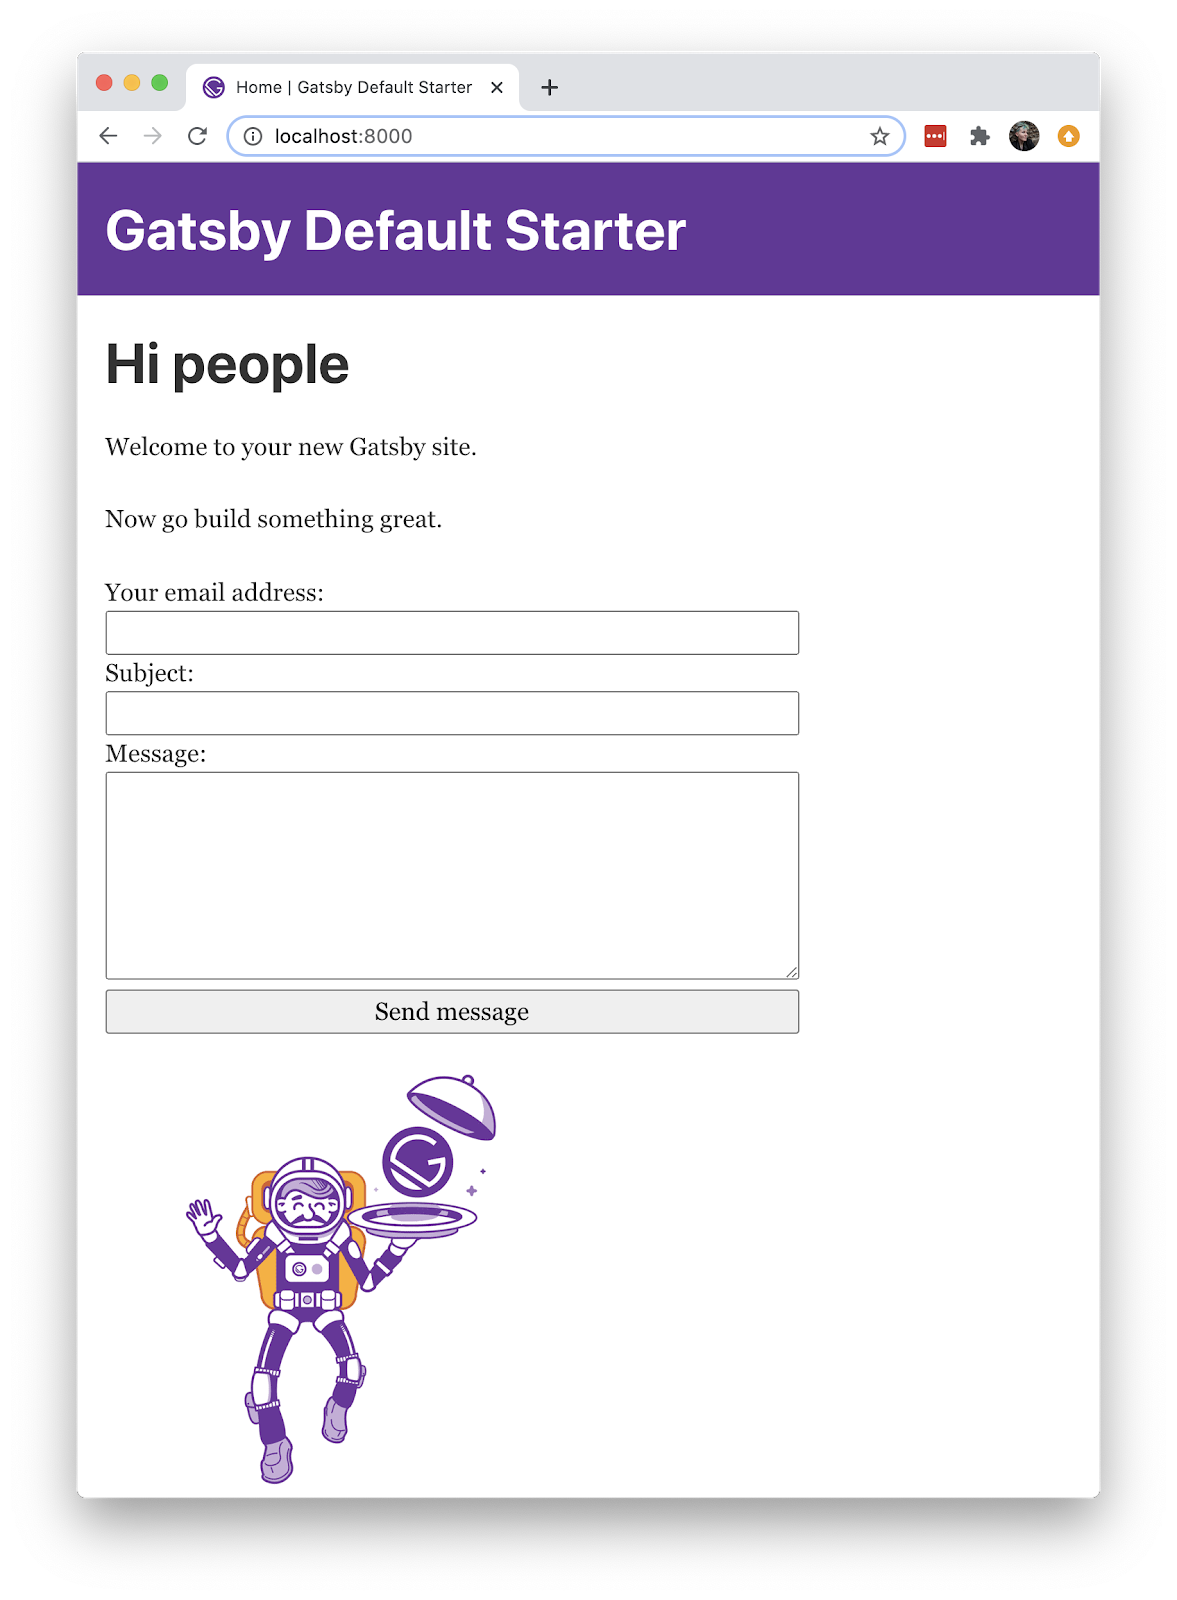 Screenshot of Gatsby default starter running on localhost, with the addition of an email contact form. The form has fields for "Your email address", "subject", and "message" in addition to a submit button.